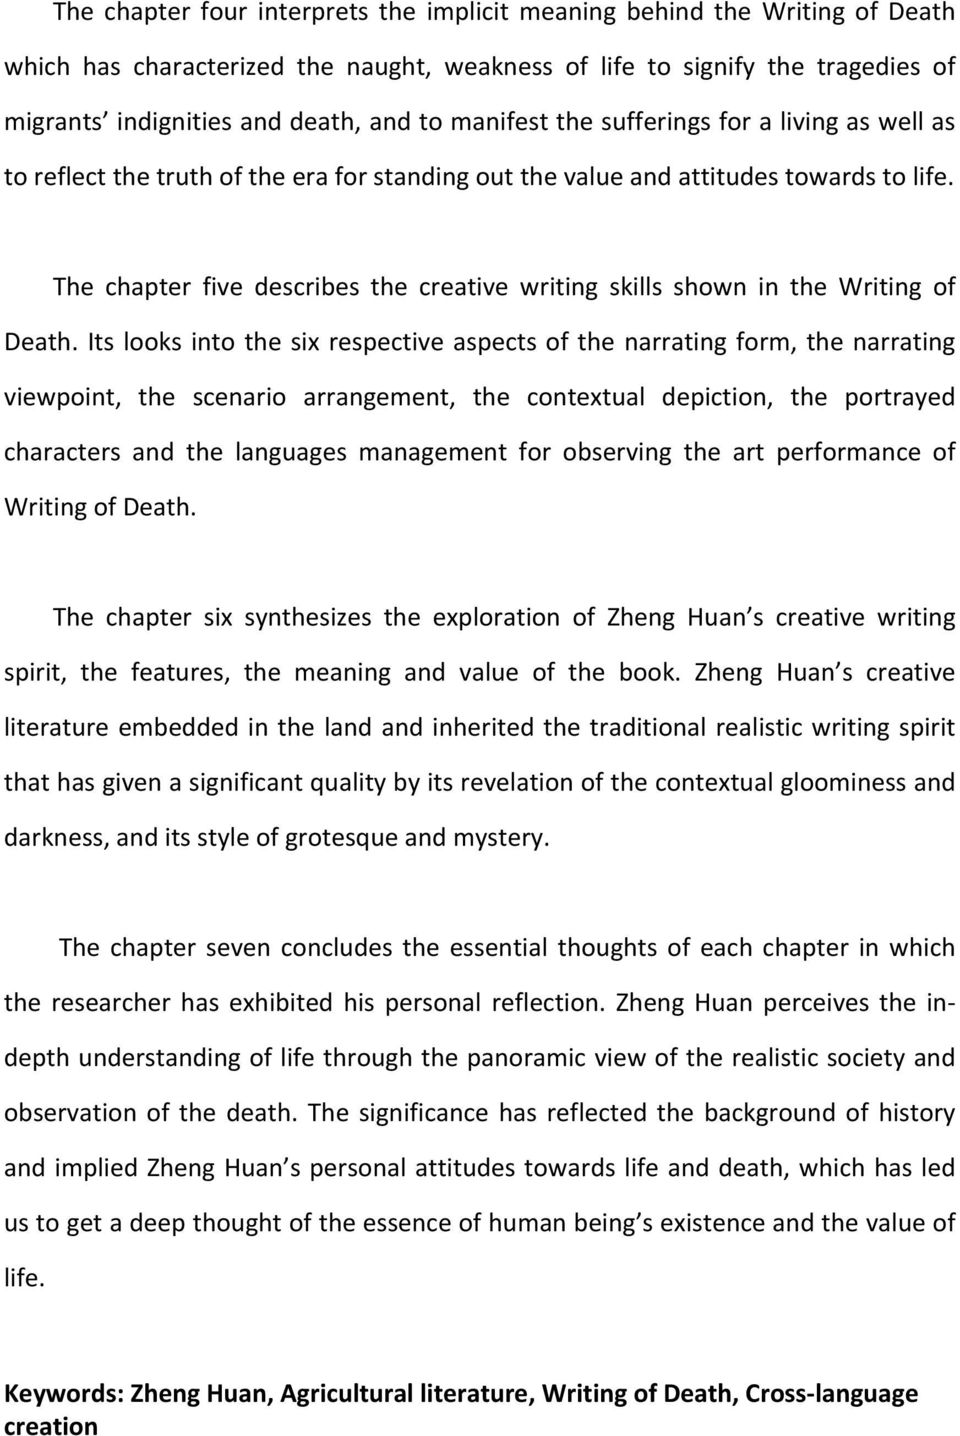 The chapter five describes the creative writing skills shown in the Writing of Death.